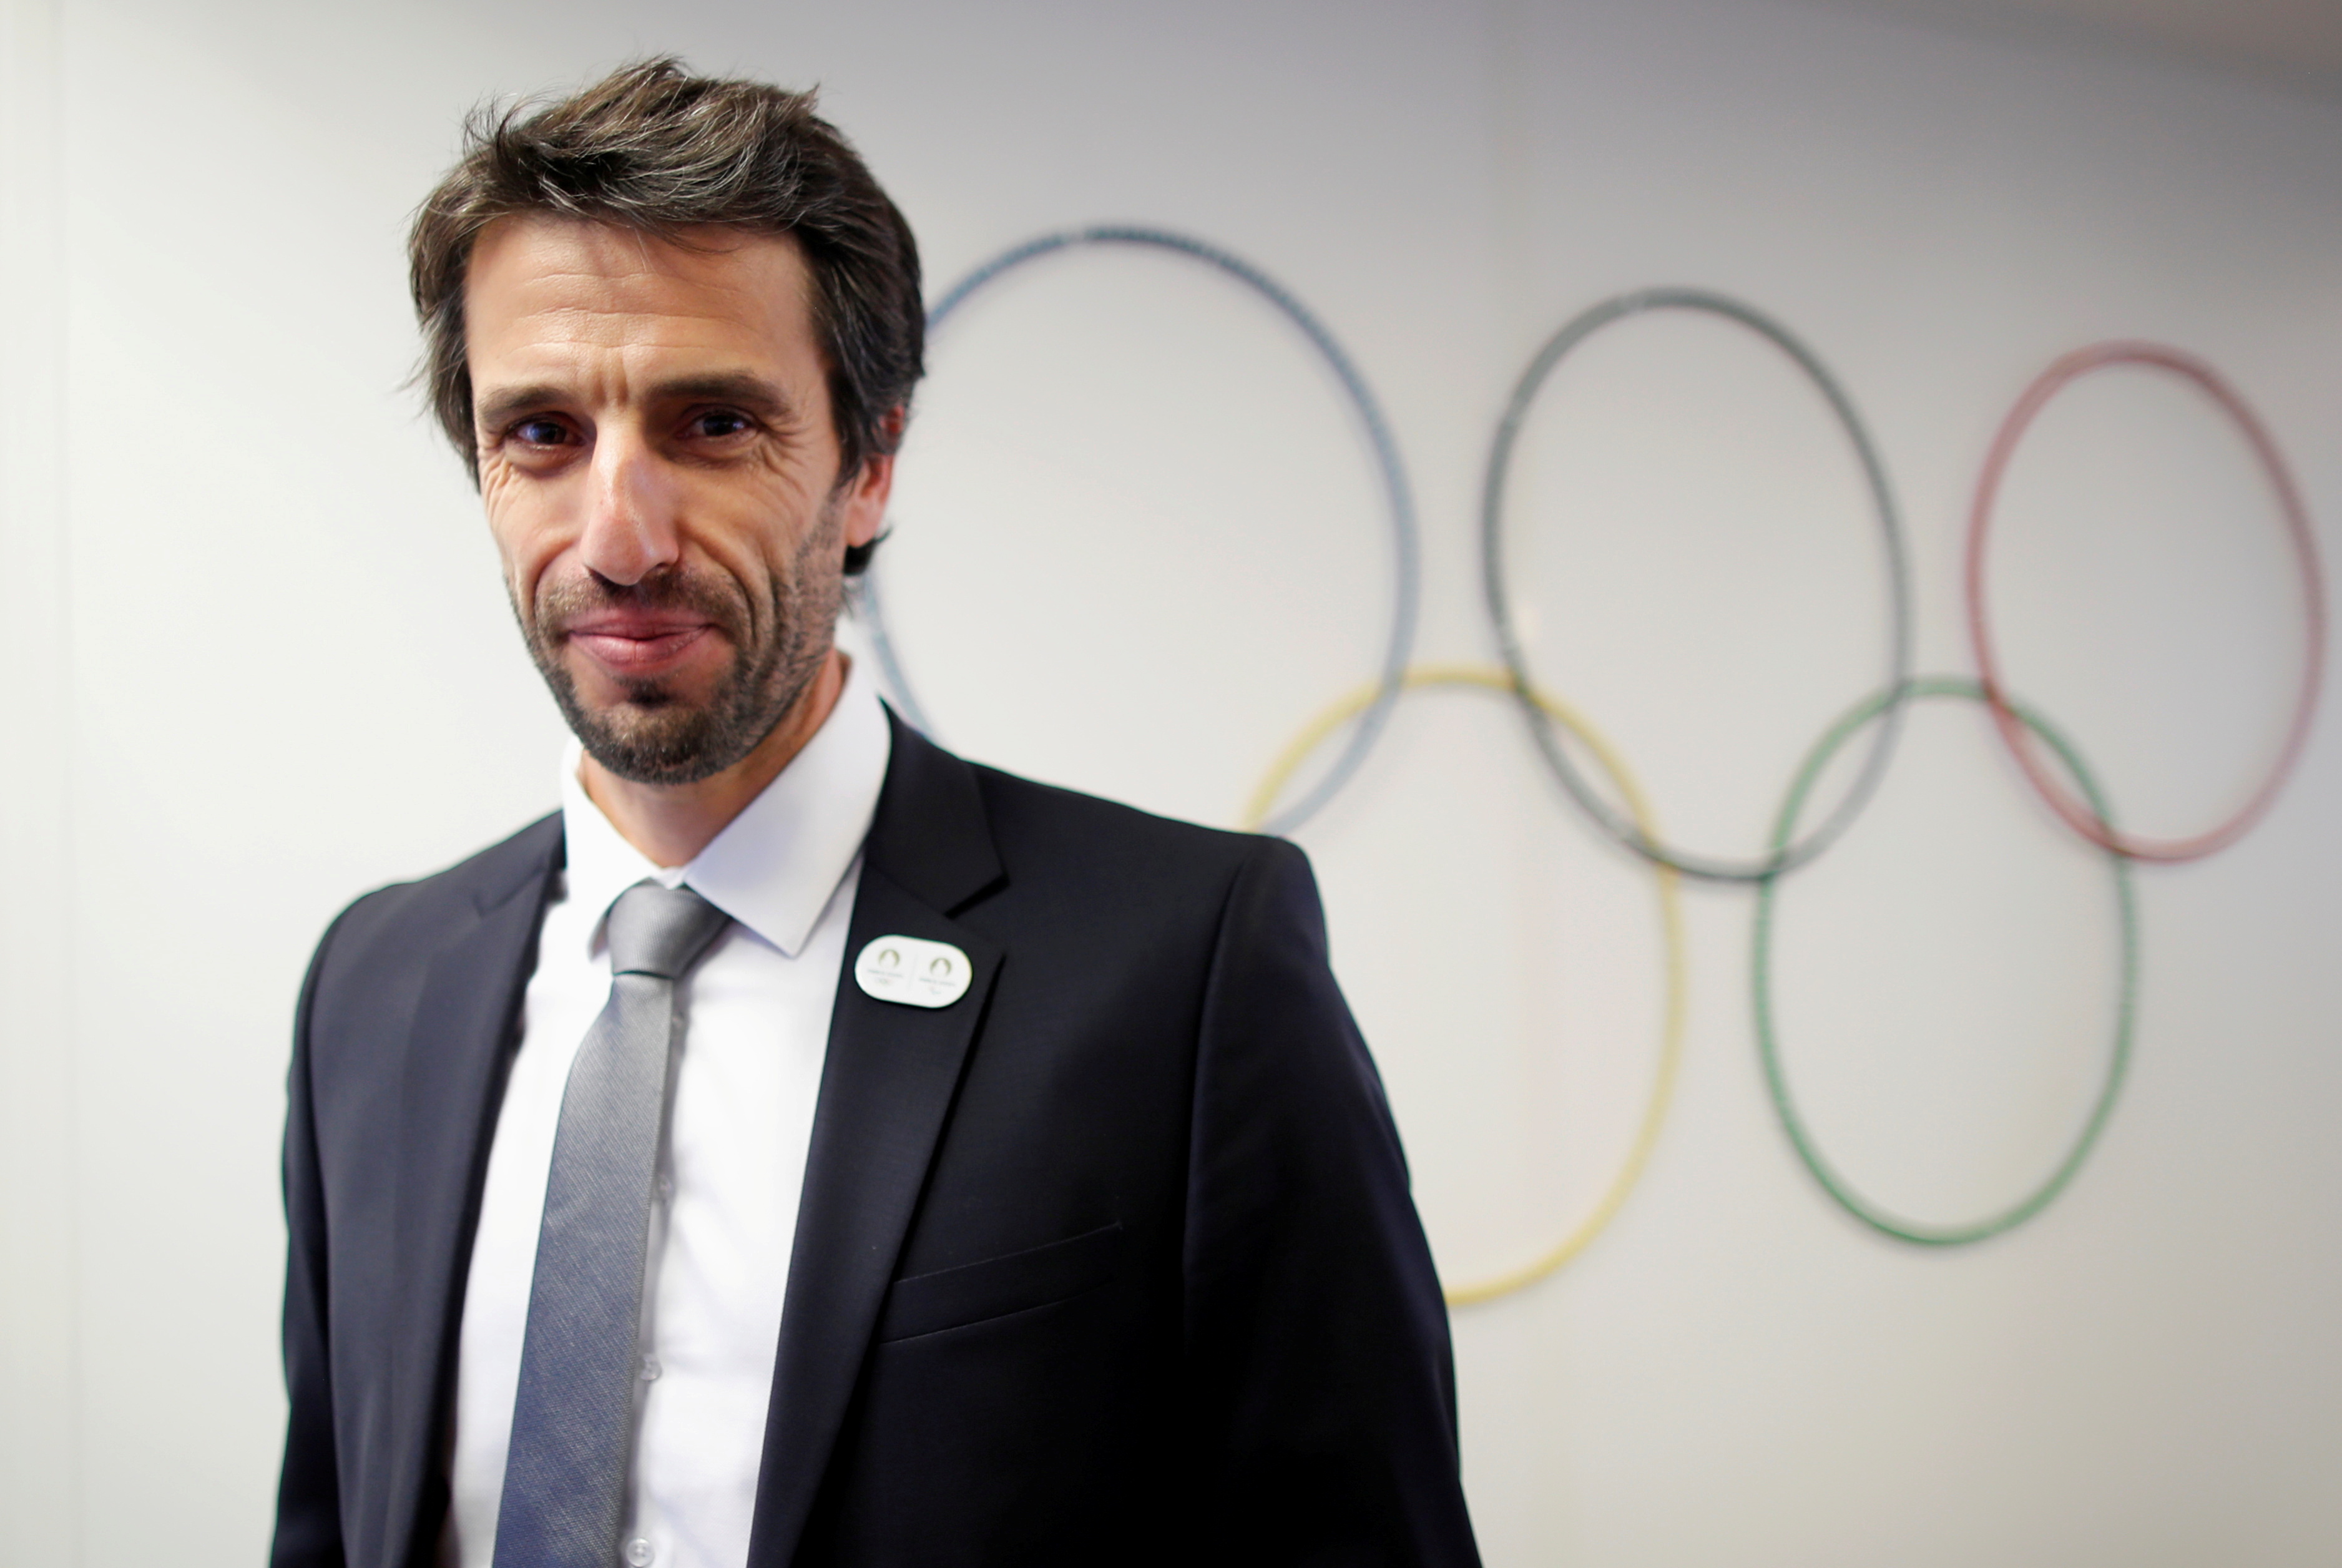 Paris 2024 Games chief Tony Estanguet poses after a news conference on Olympics preparations in Paris, France, December 17, 2020.   REUTERS/Charles Platiau